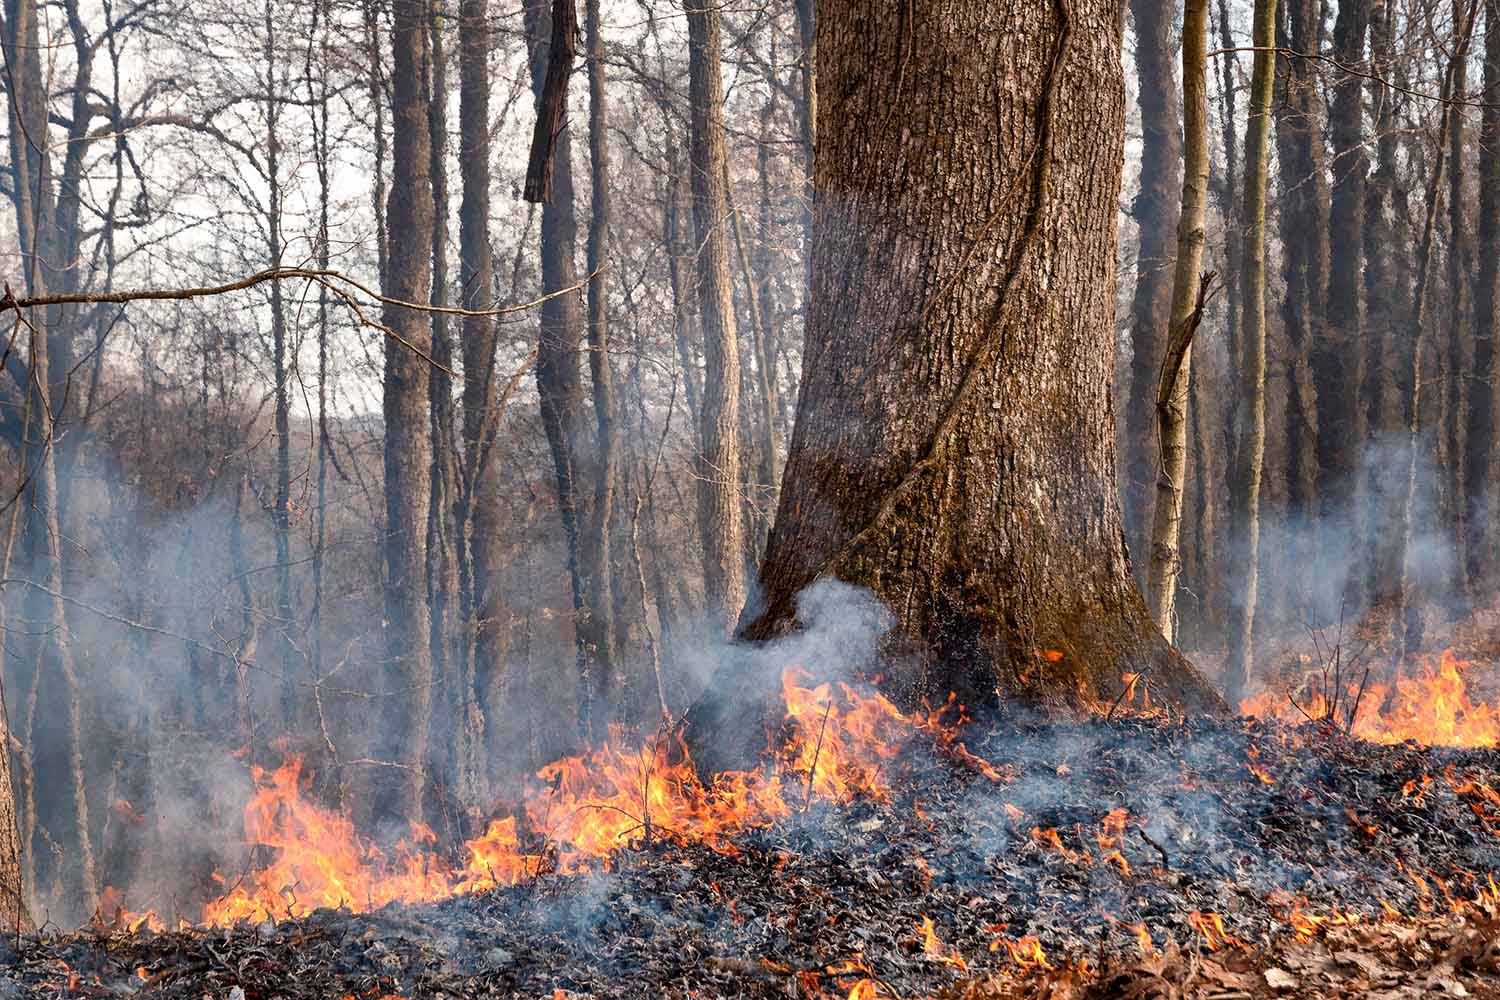 Fire creeps along the forest floor as an oak tree rises firmly from the burnt ground.